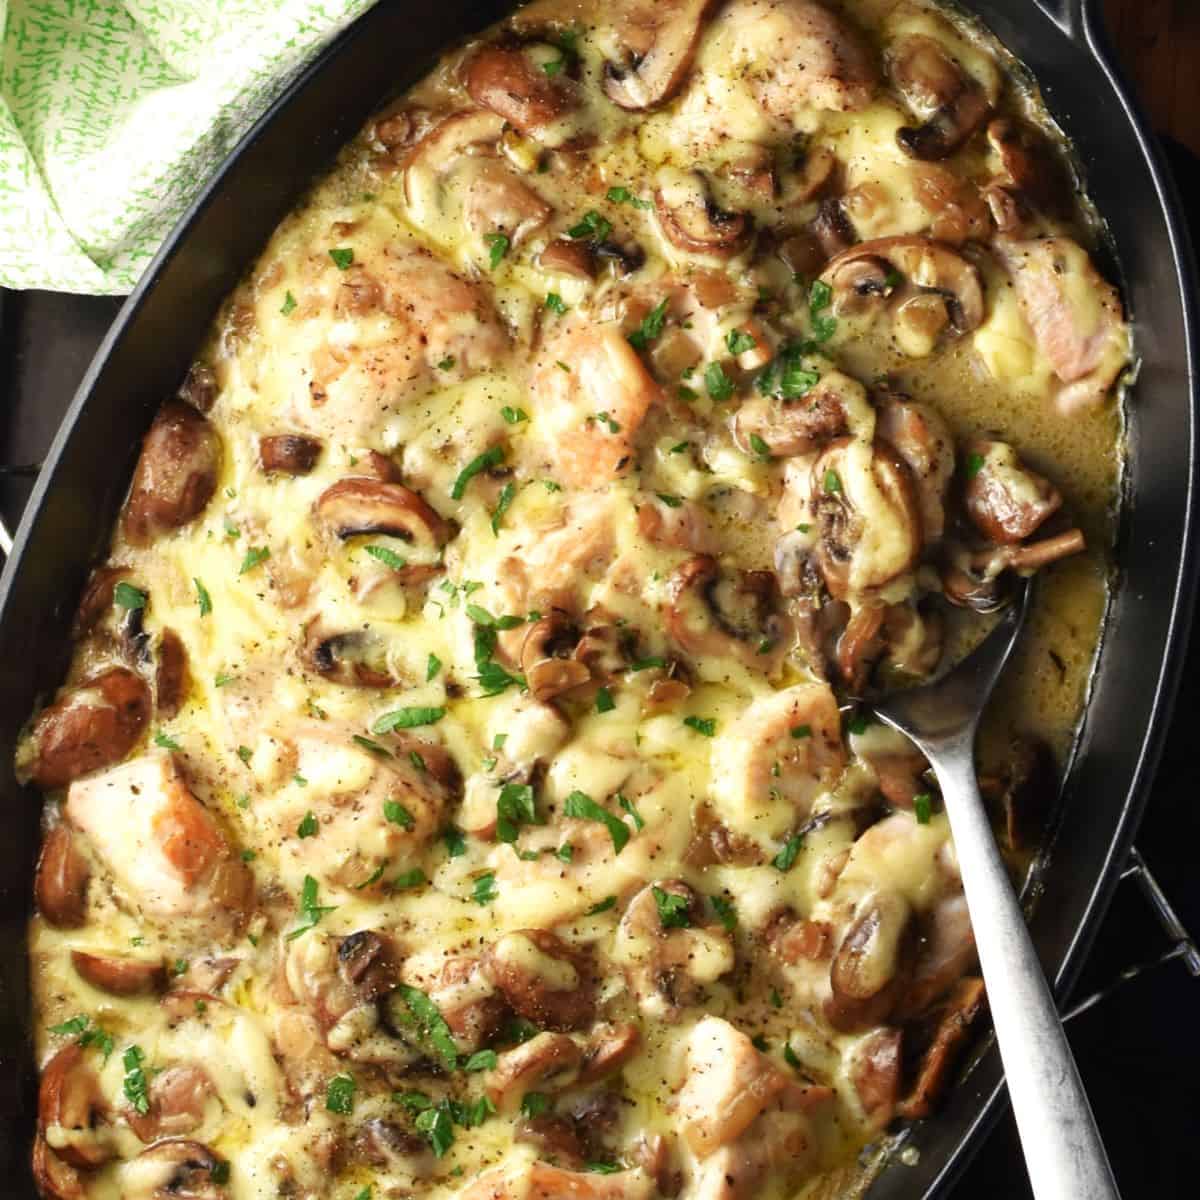 Top down view of chicken and mushroom casserole in oval dish.